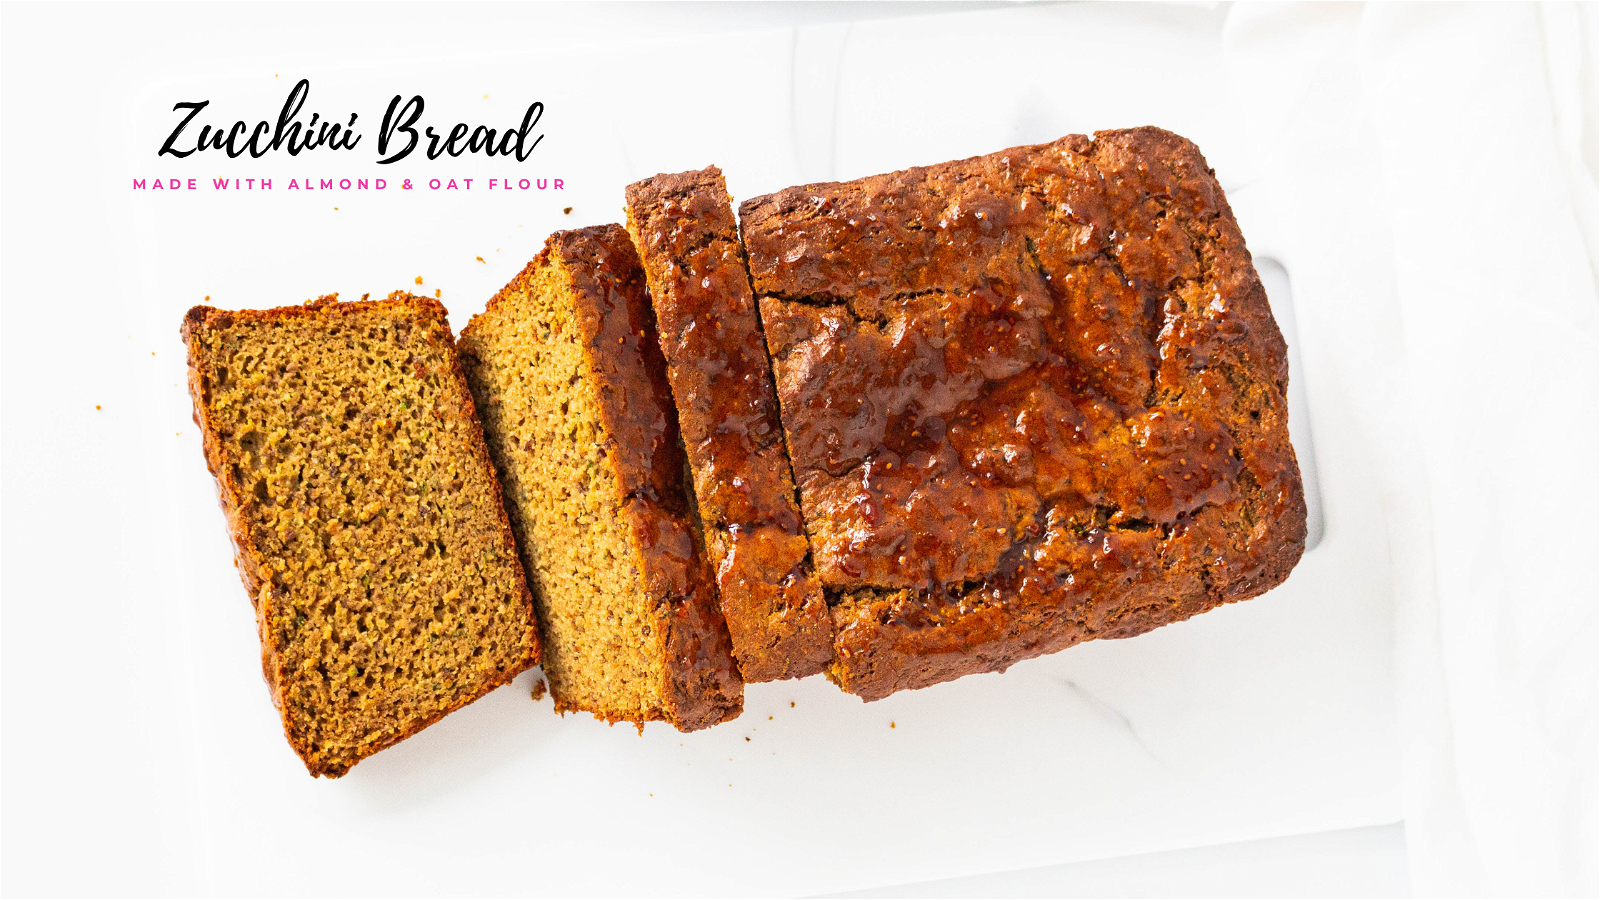 Image of Zucchini Bread made with Almond Flour and Oat flour